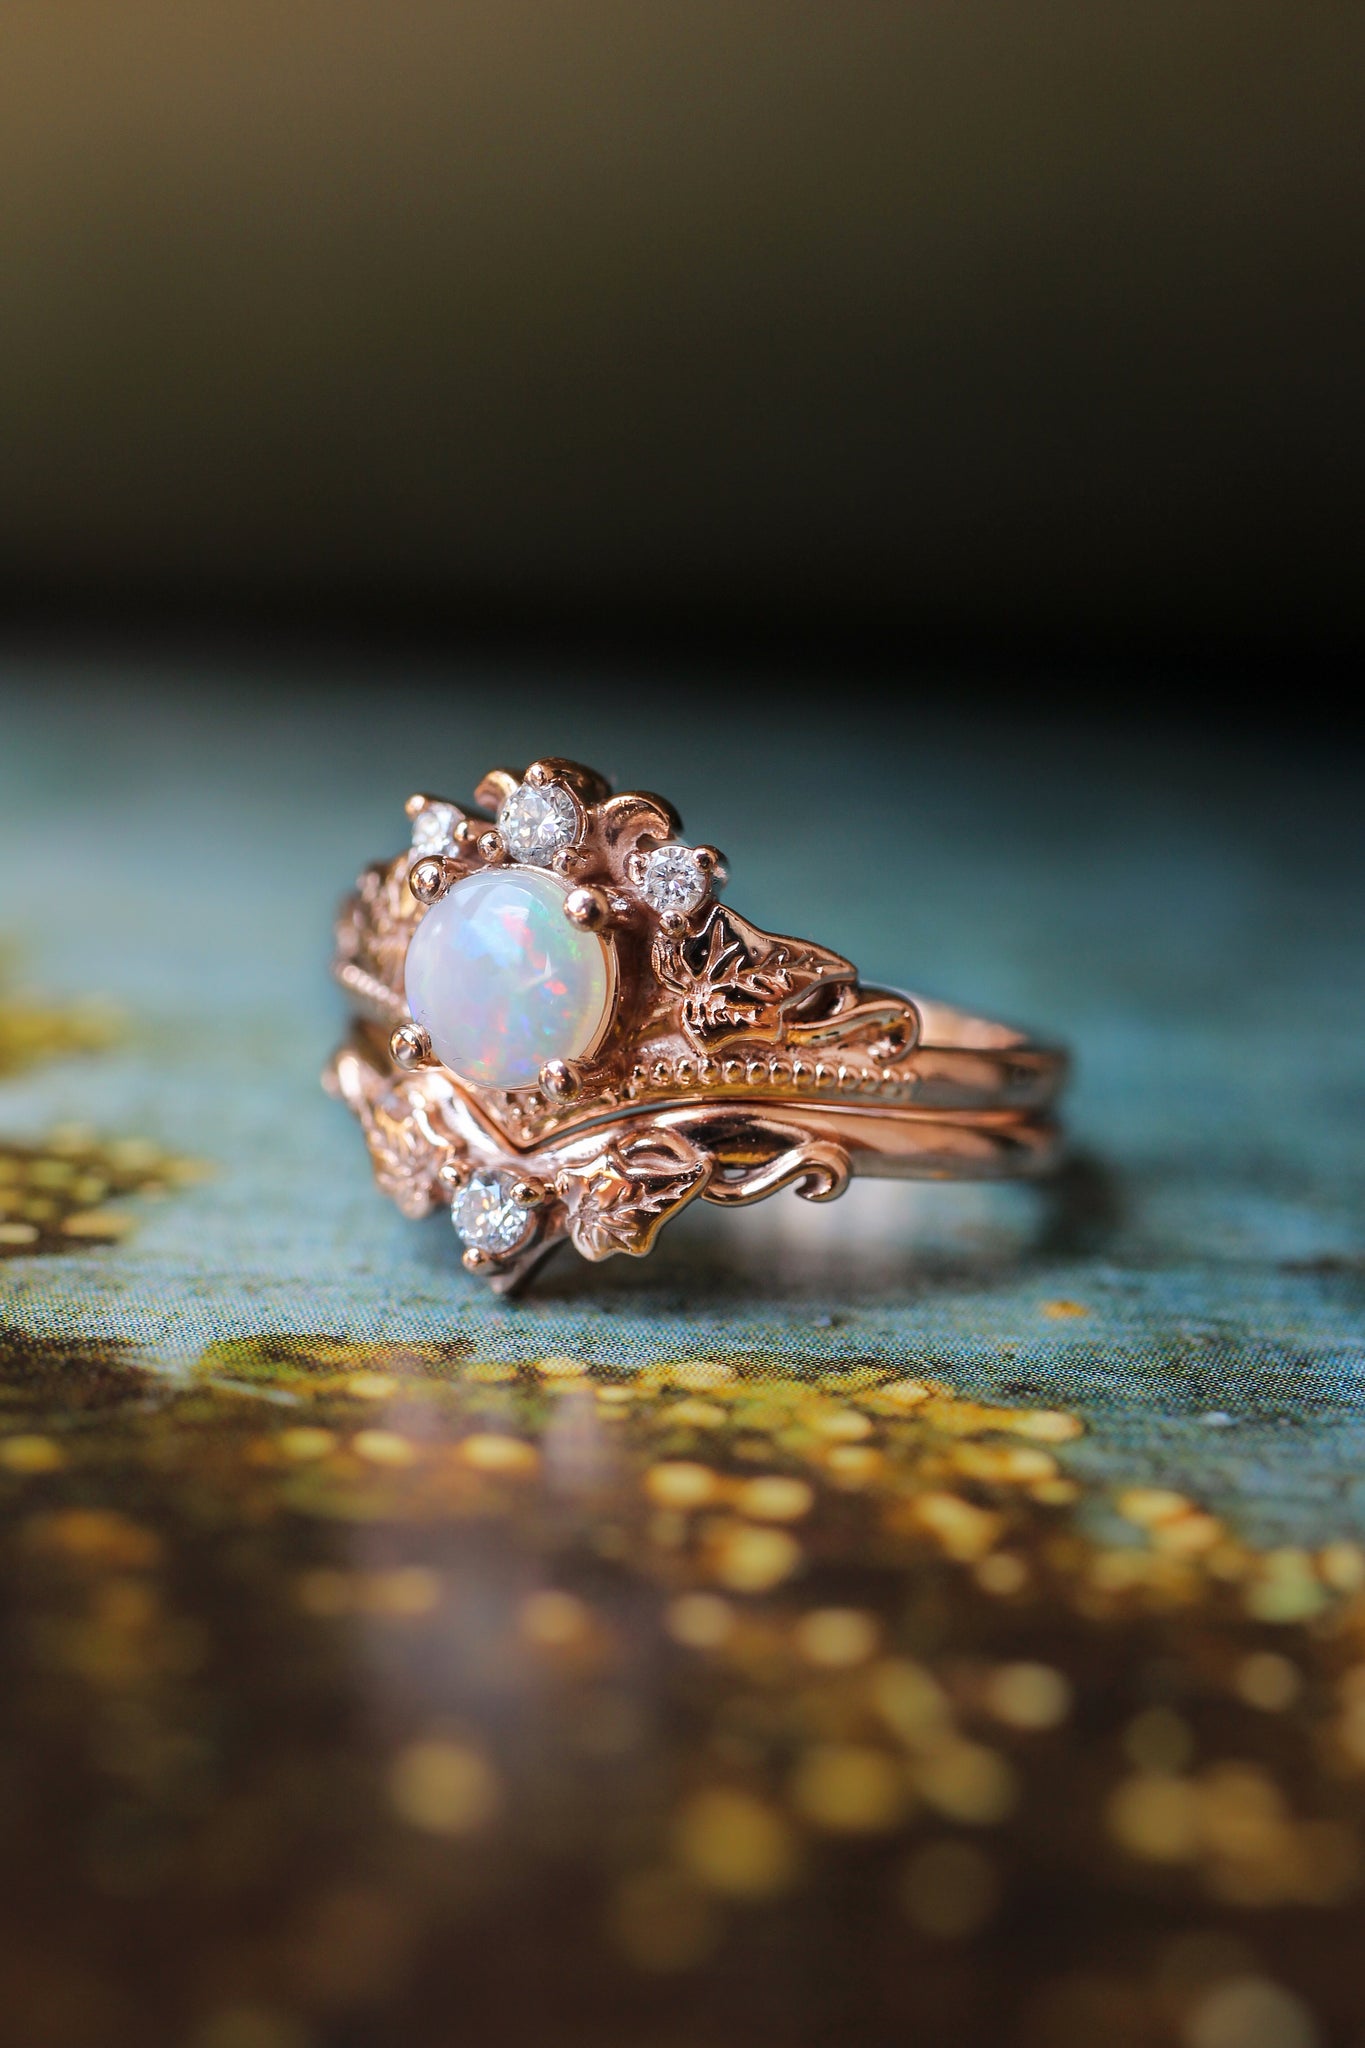 Bridal ring set with opal and diamonds / Ariadne - Eden Garden Jewelry™